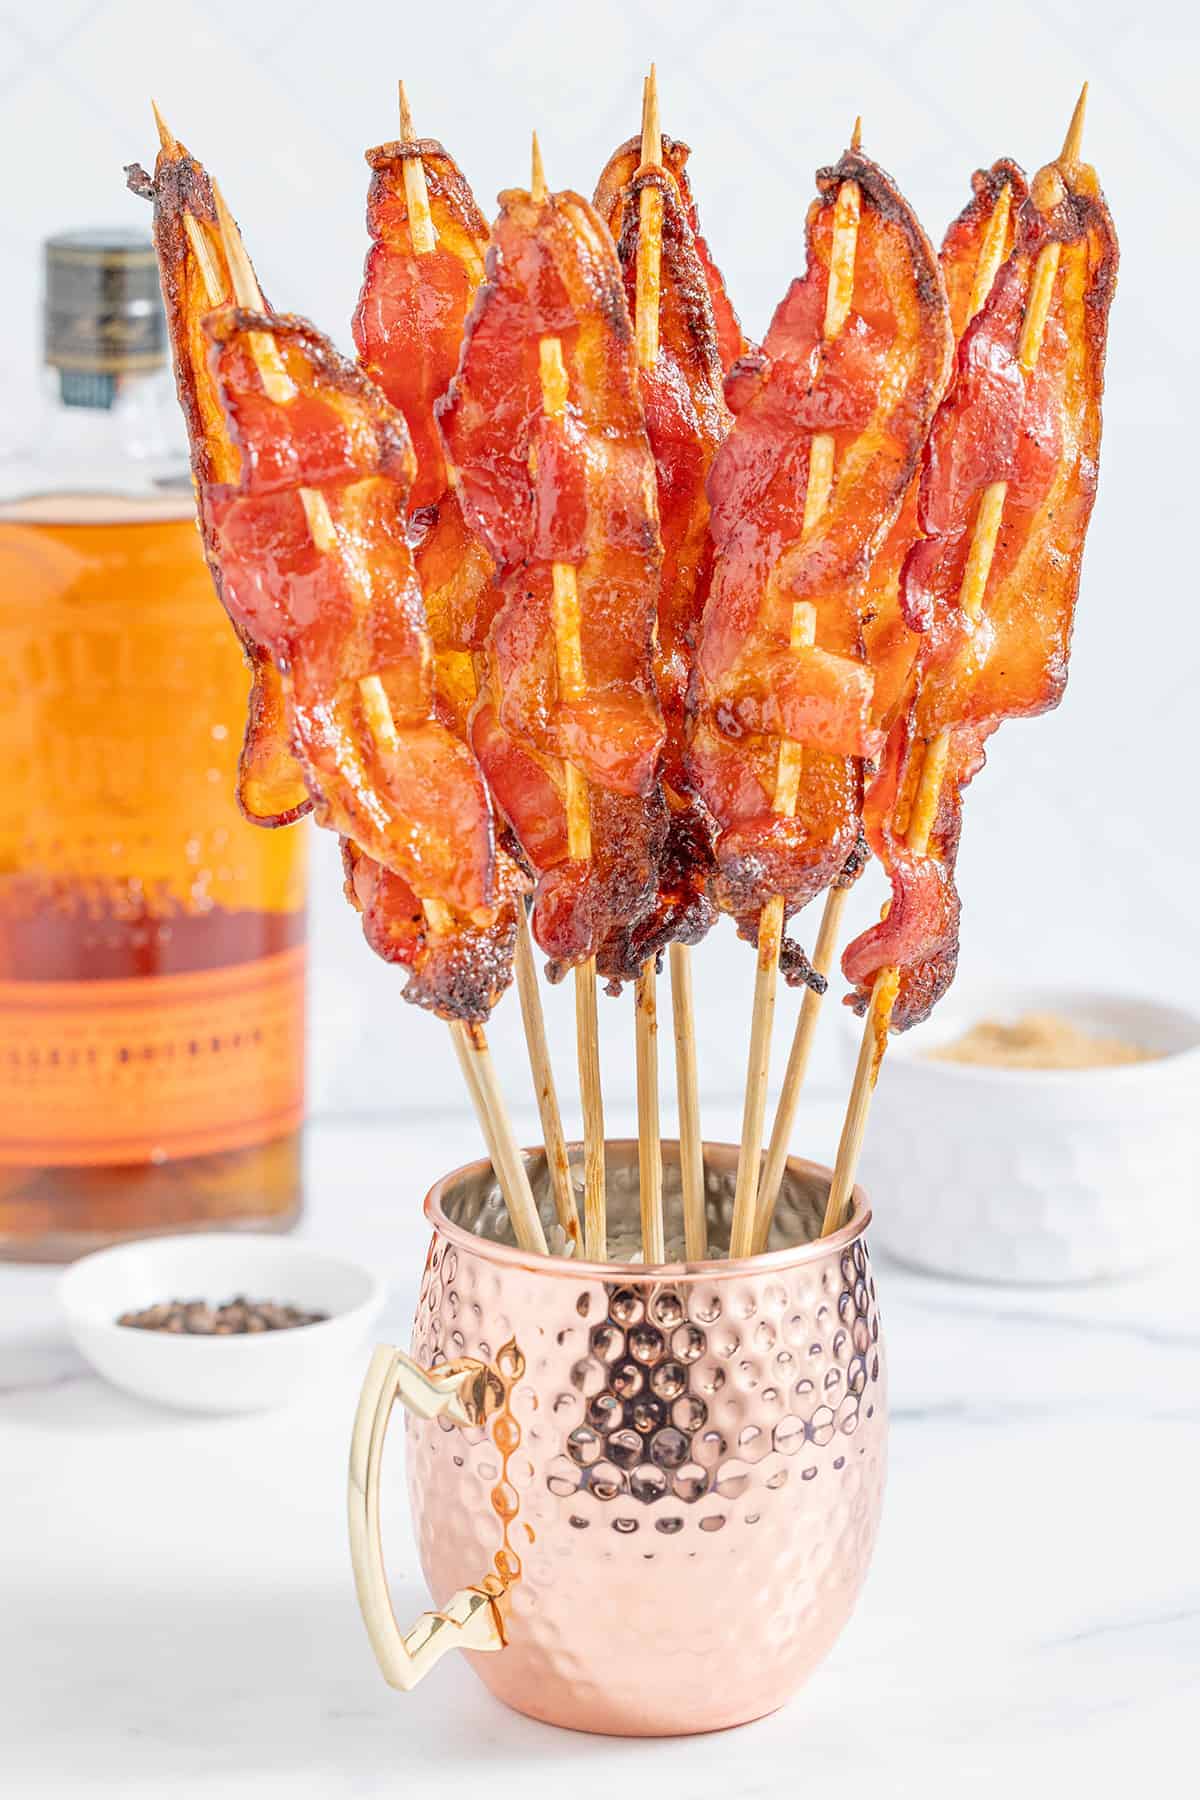 Candied bacon strips on skewers in a metal cup on a table.